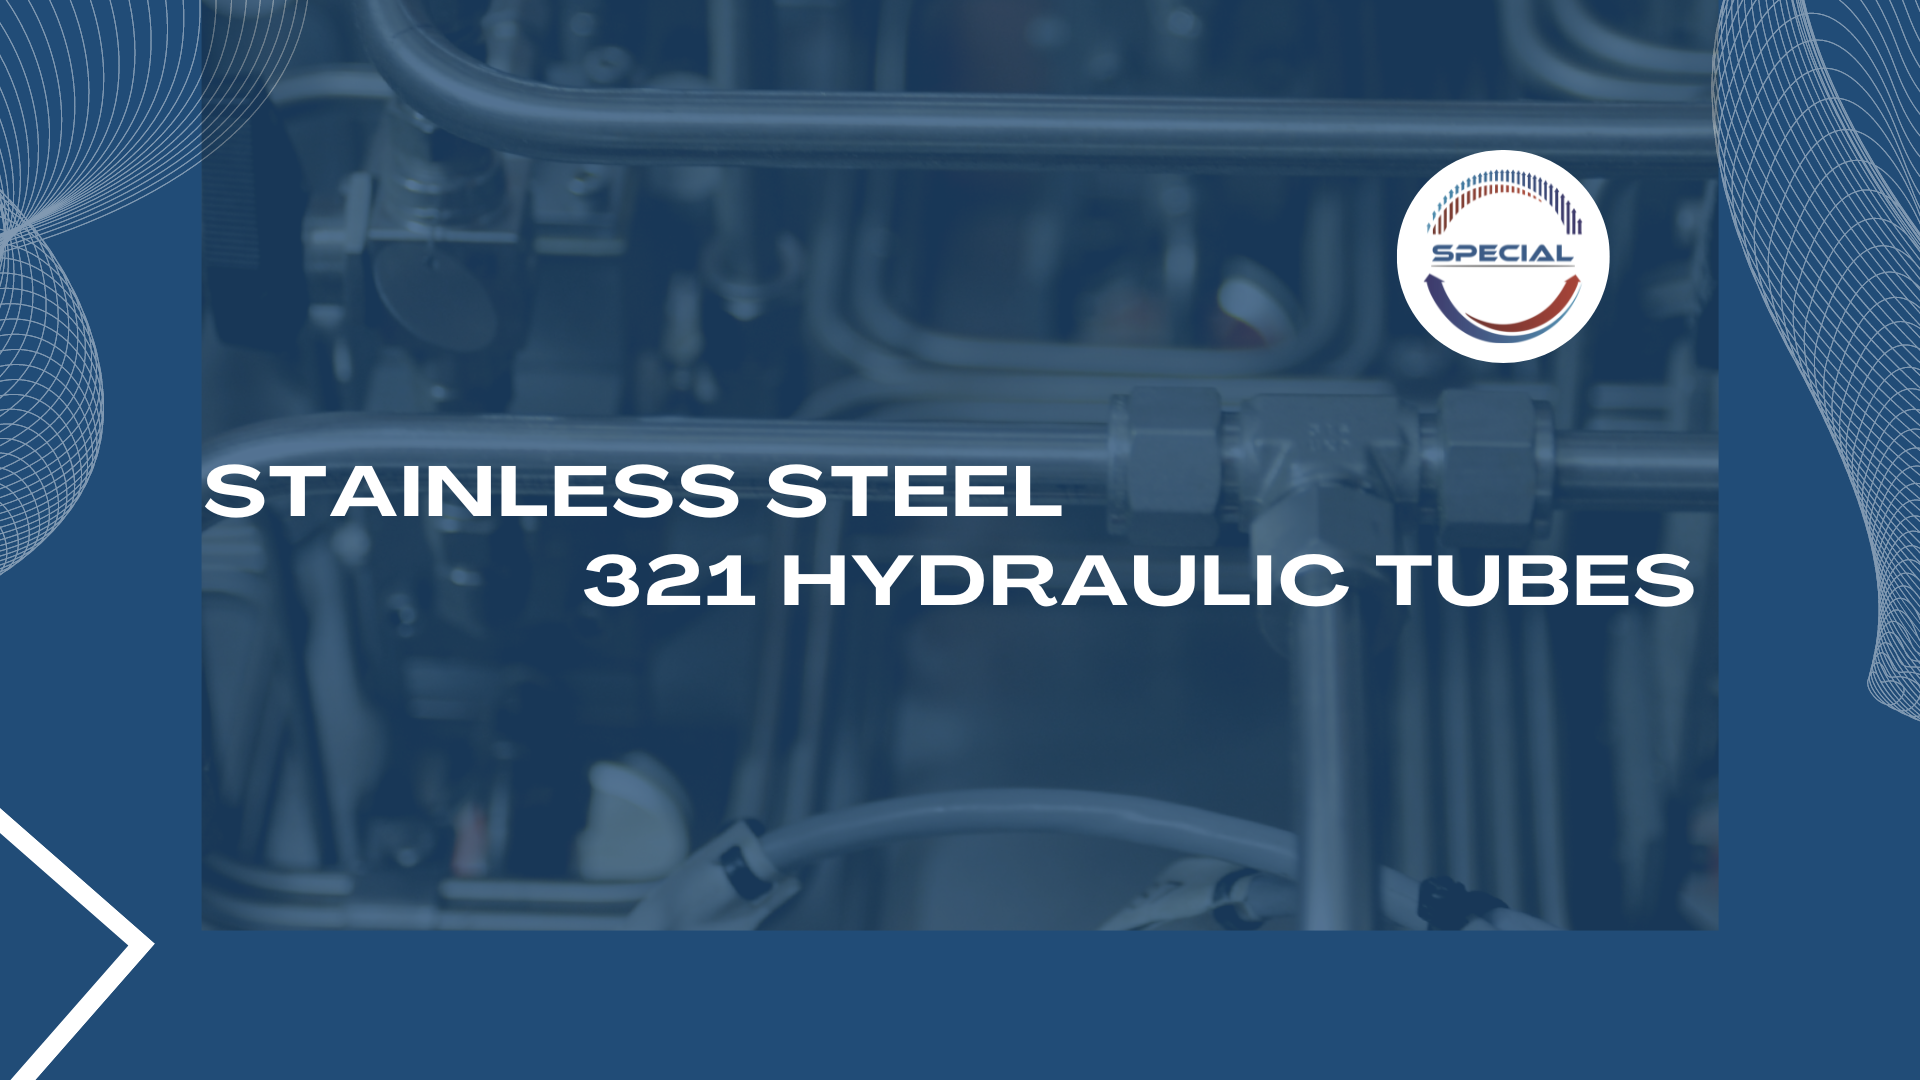 Stainless Steel 321 Hydraulic Tubes